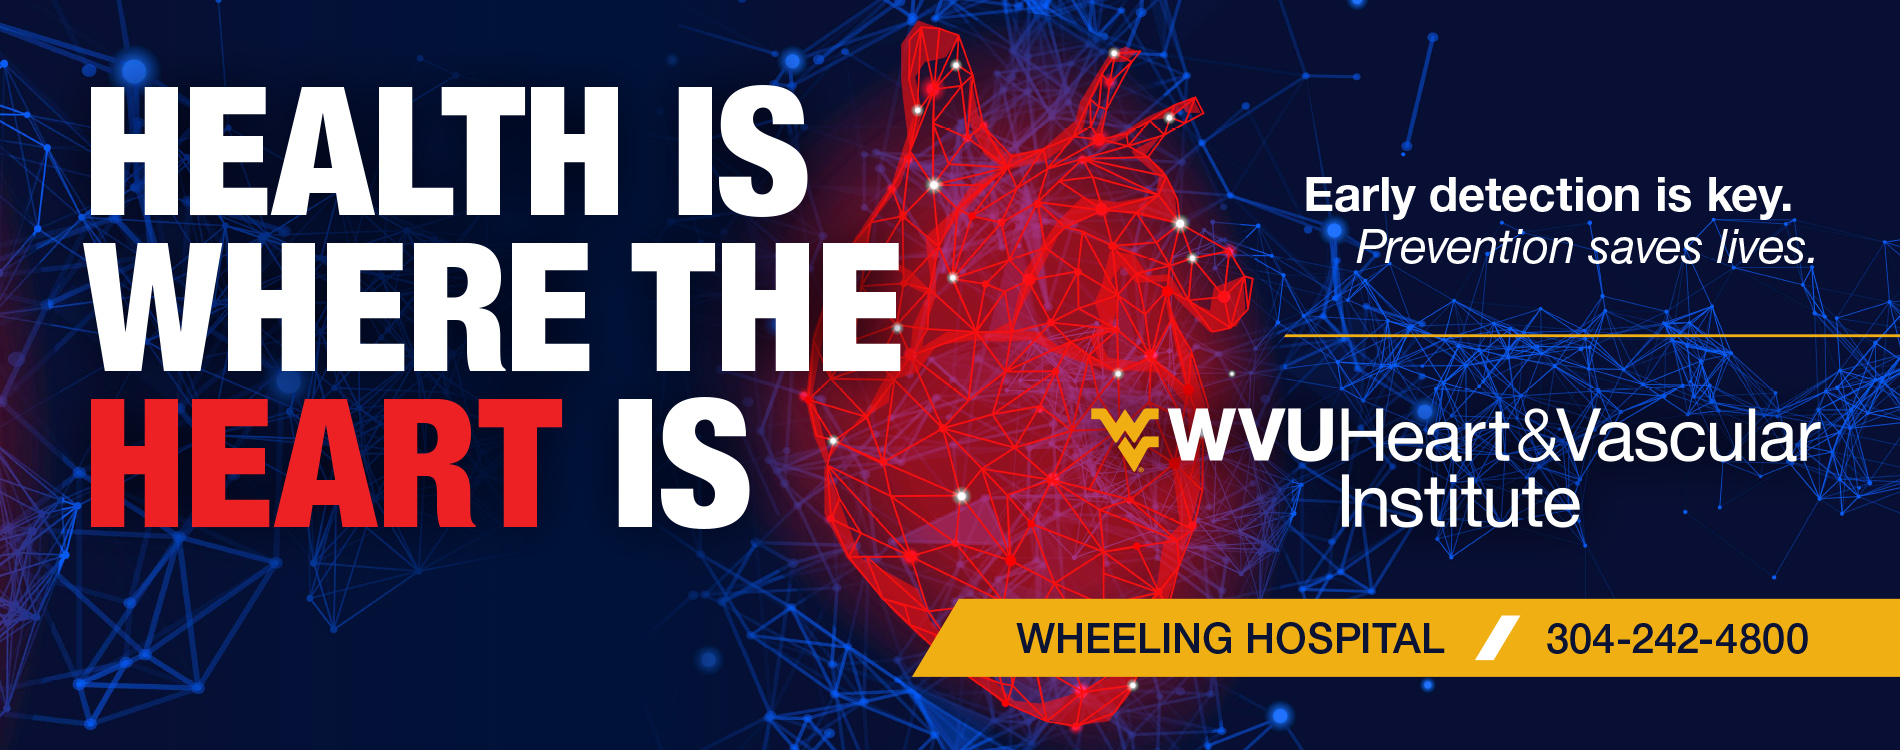 Health is where the heart is. Early detection is key. Prevention Saves Lives. WVU Heart and Vascular Institute. Wheeling Hospital. 304-242-4800. 